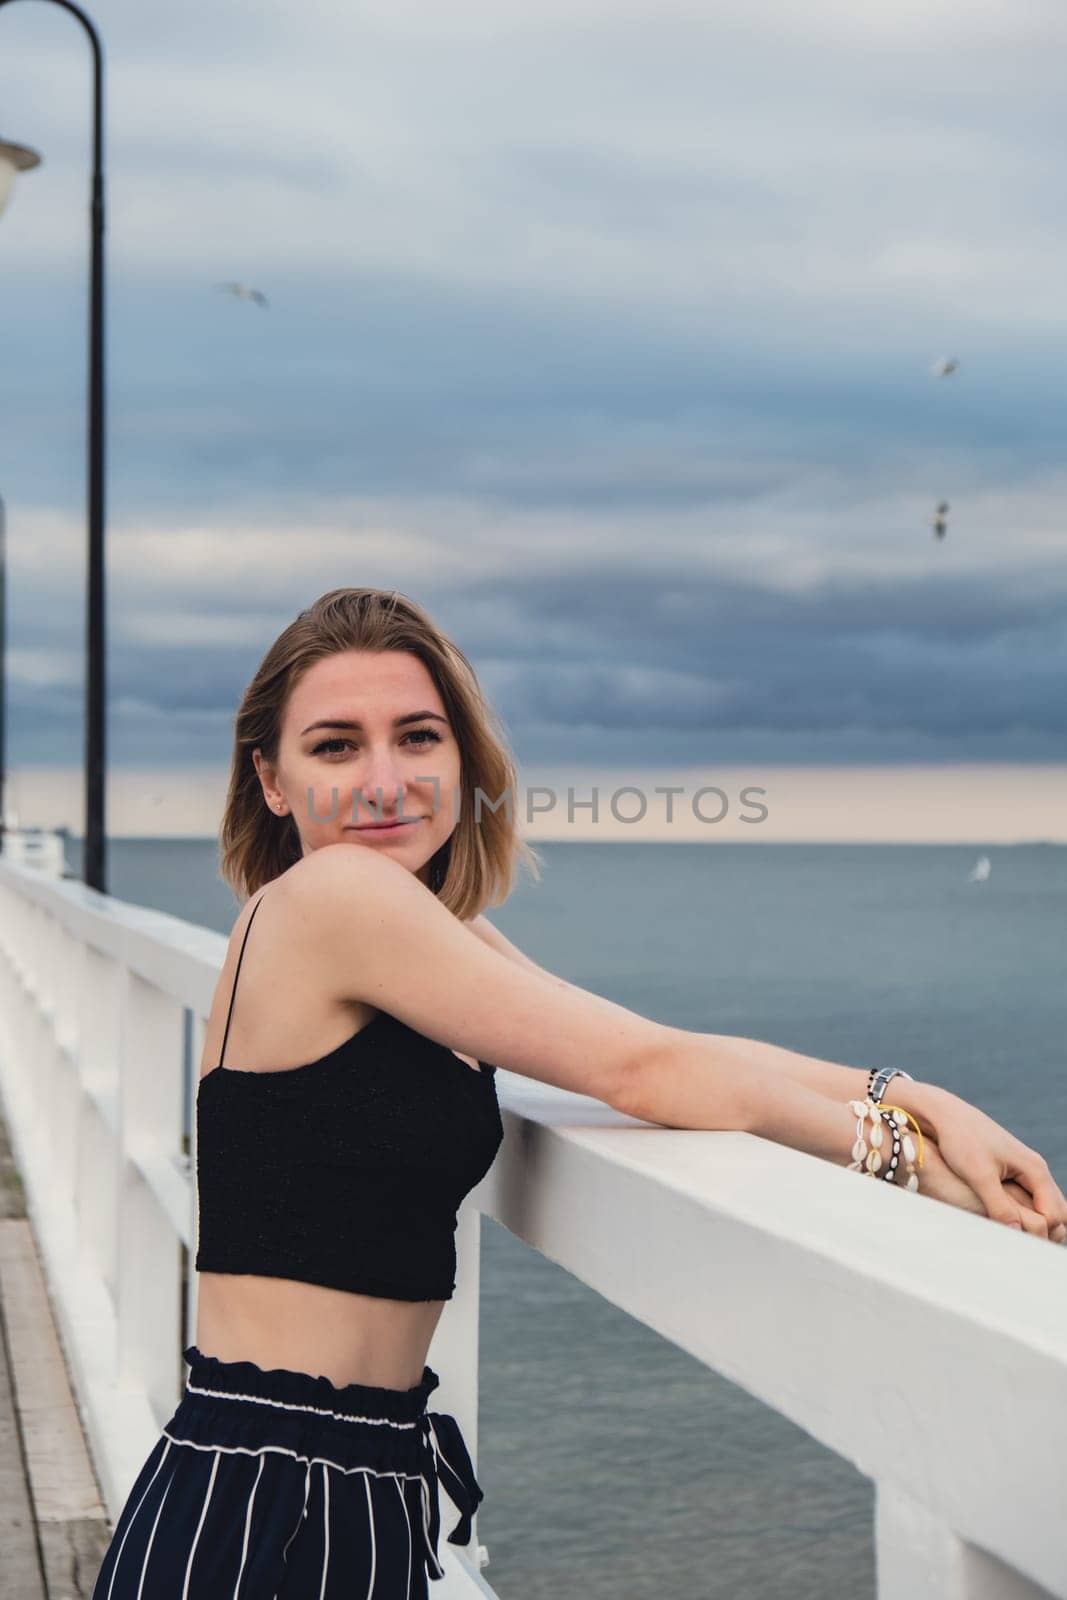 Young woman standing on wooden pier blurred beachside background. Attractive female enjoying the sea shore travel and active lifestyle concept. Springtime. Wellness wellbeing mental health inner peace Slow life digital detox